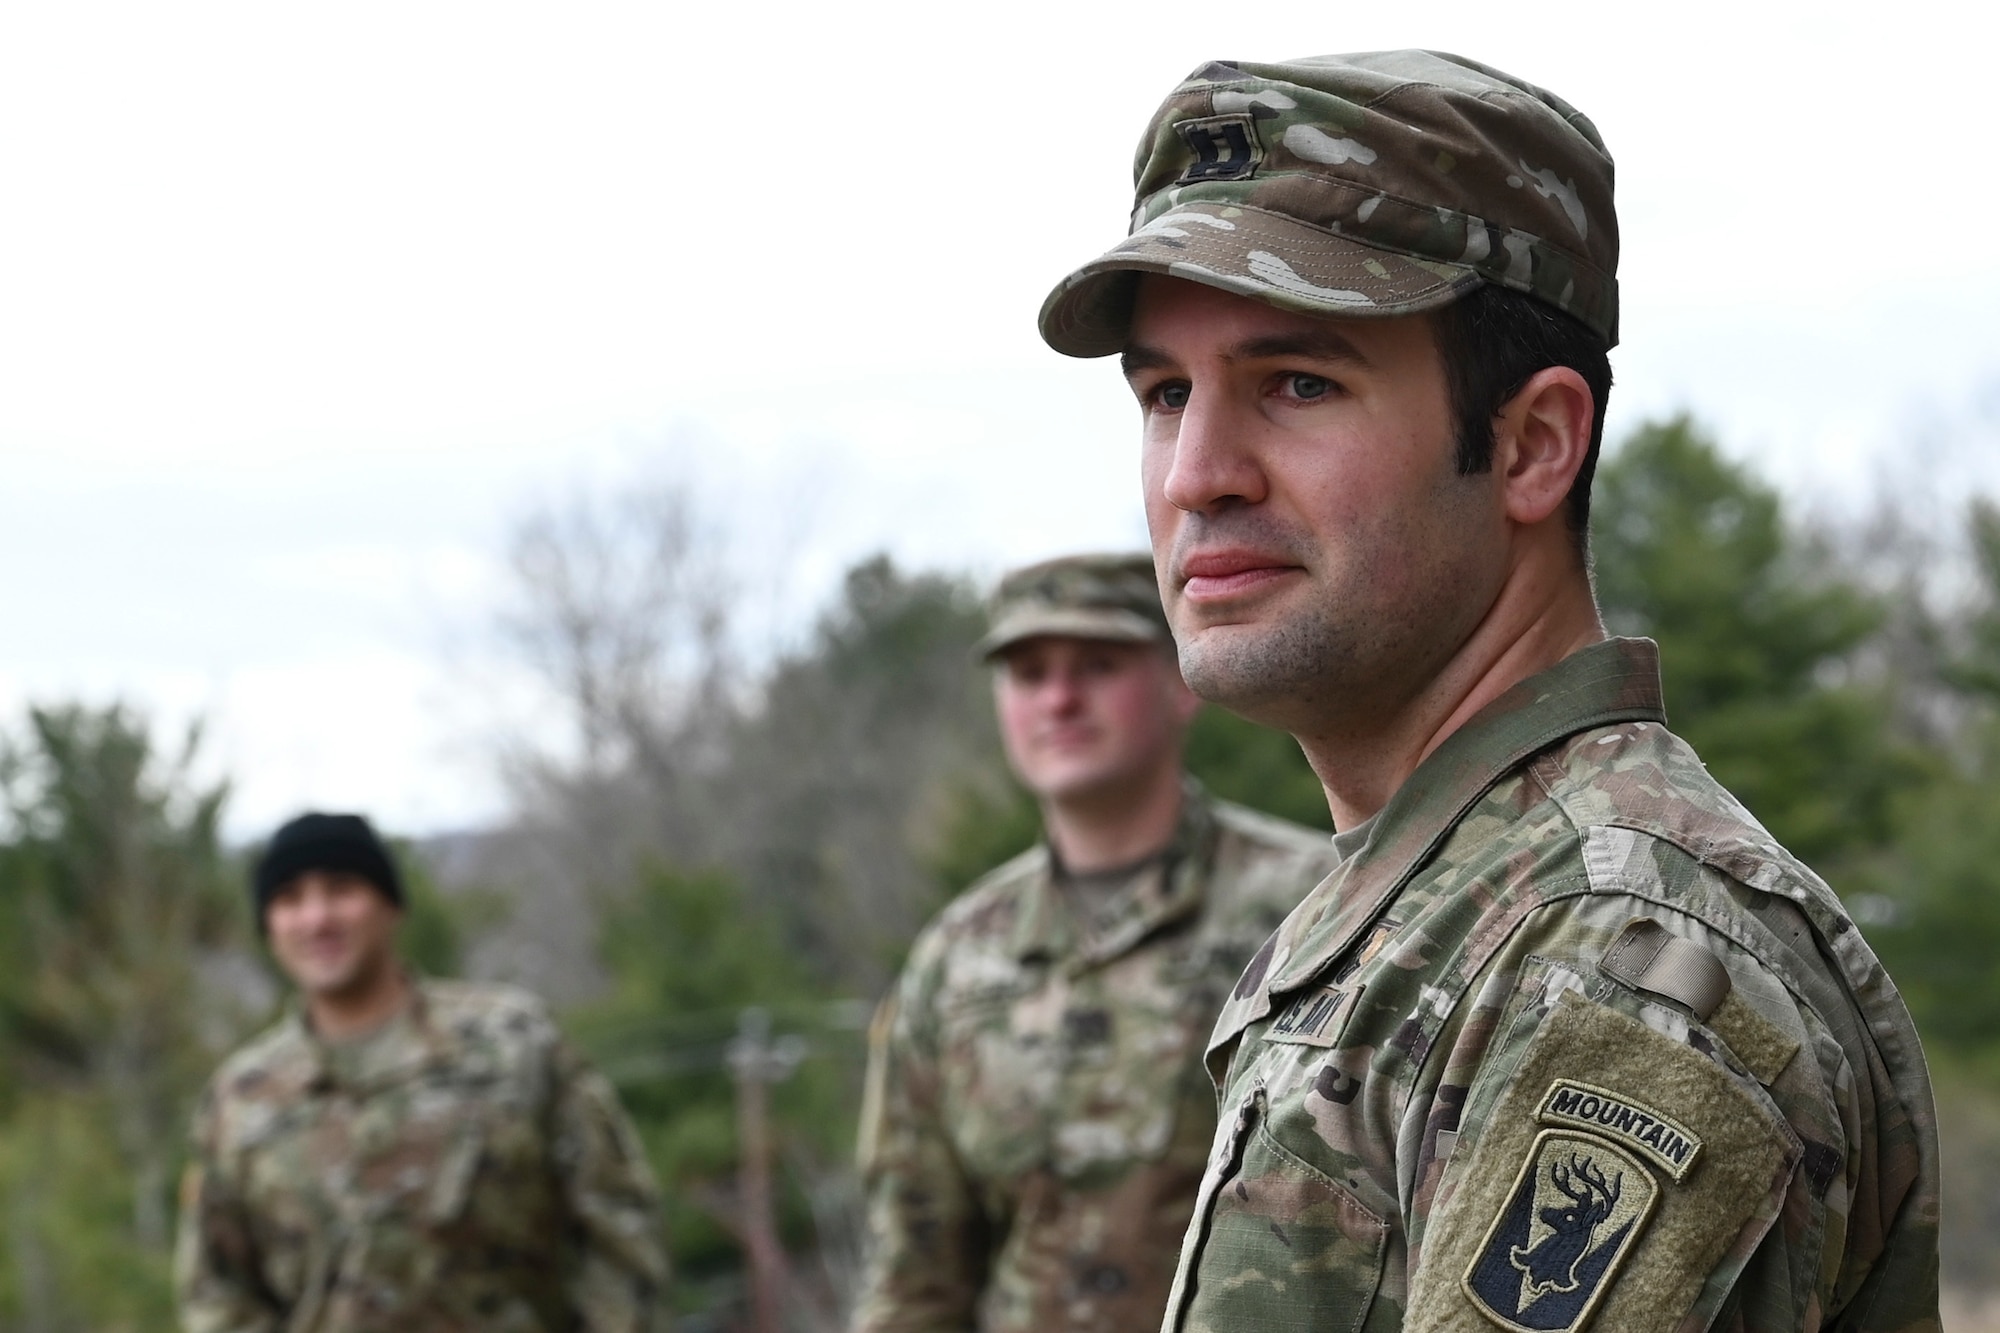 U.S. Army Capt. Nathan Ferrance, Bravo Company Commander, assigned to the 1st Battalion, 102nd Infantry Regiment delivers a mission briefing to soldiers at the Middletown Armed Forces Reserve Center, March 31, 2020, Middletown, Connecticut. The soldiers were placed on State Active Duty orders in reponse to the COVID-19 pandemic. (U.S. Air National Guard photo by Tech. Sgt. Tamara R. Dabney)